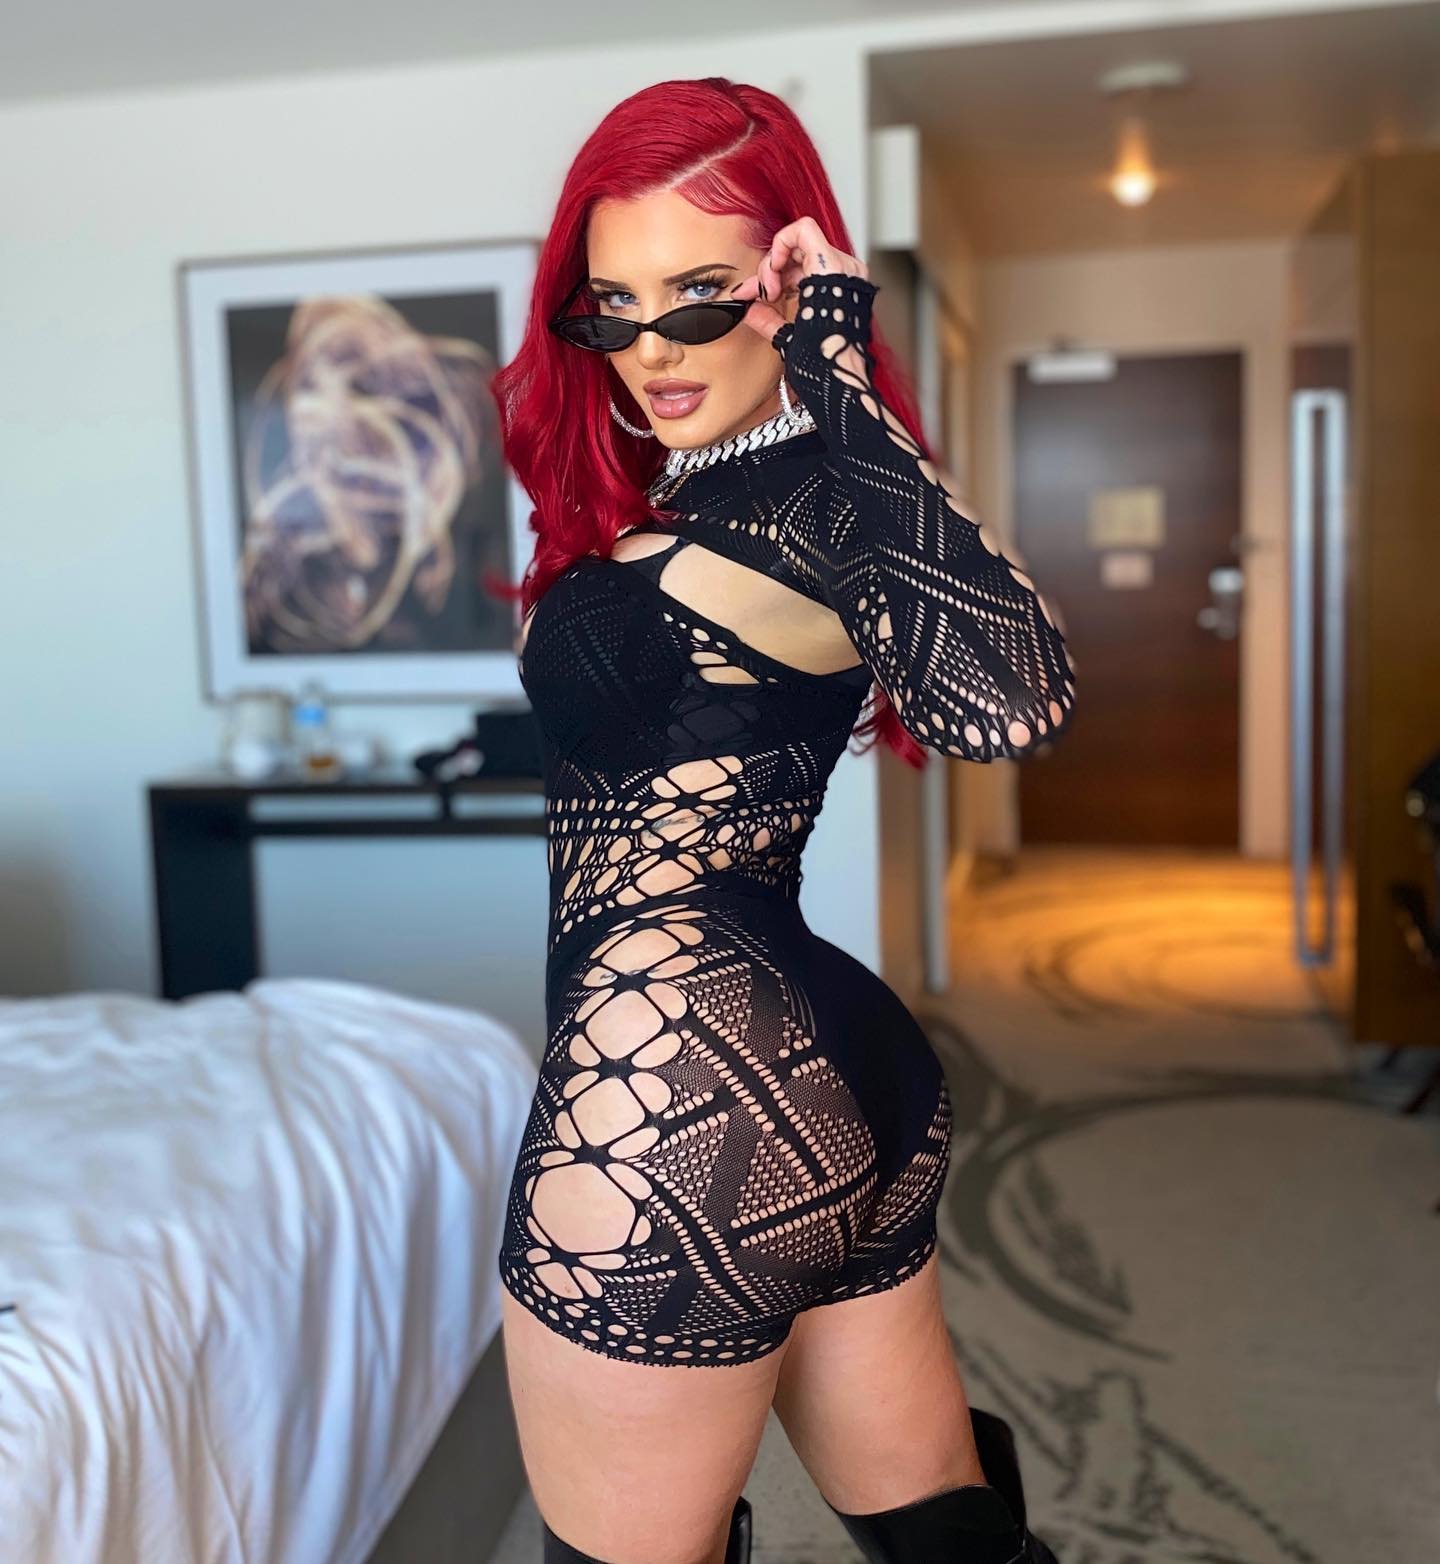 Justina Valentine Biography: Age, Net Worth, Twins, Real Name, Boyfriend, Height, Songs, Relationships